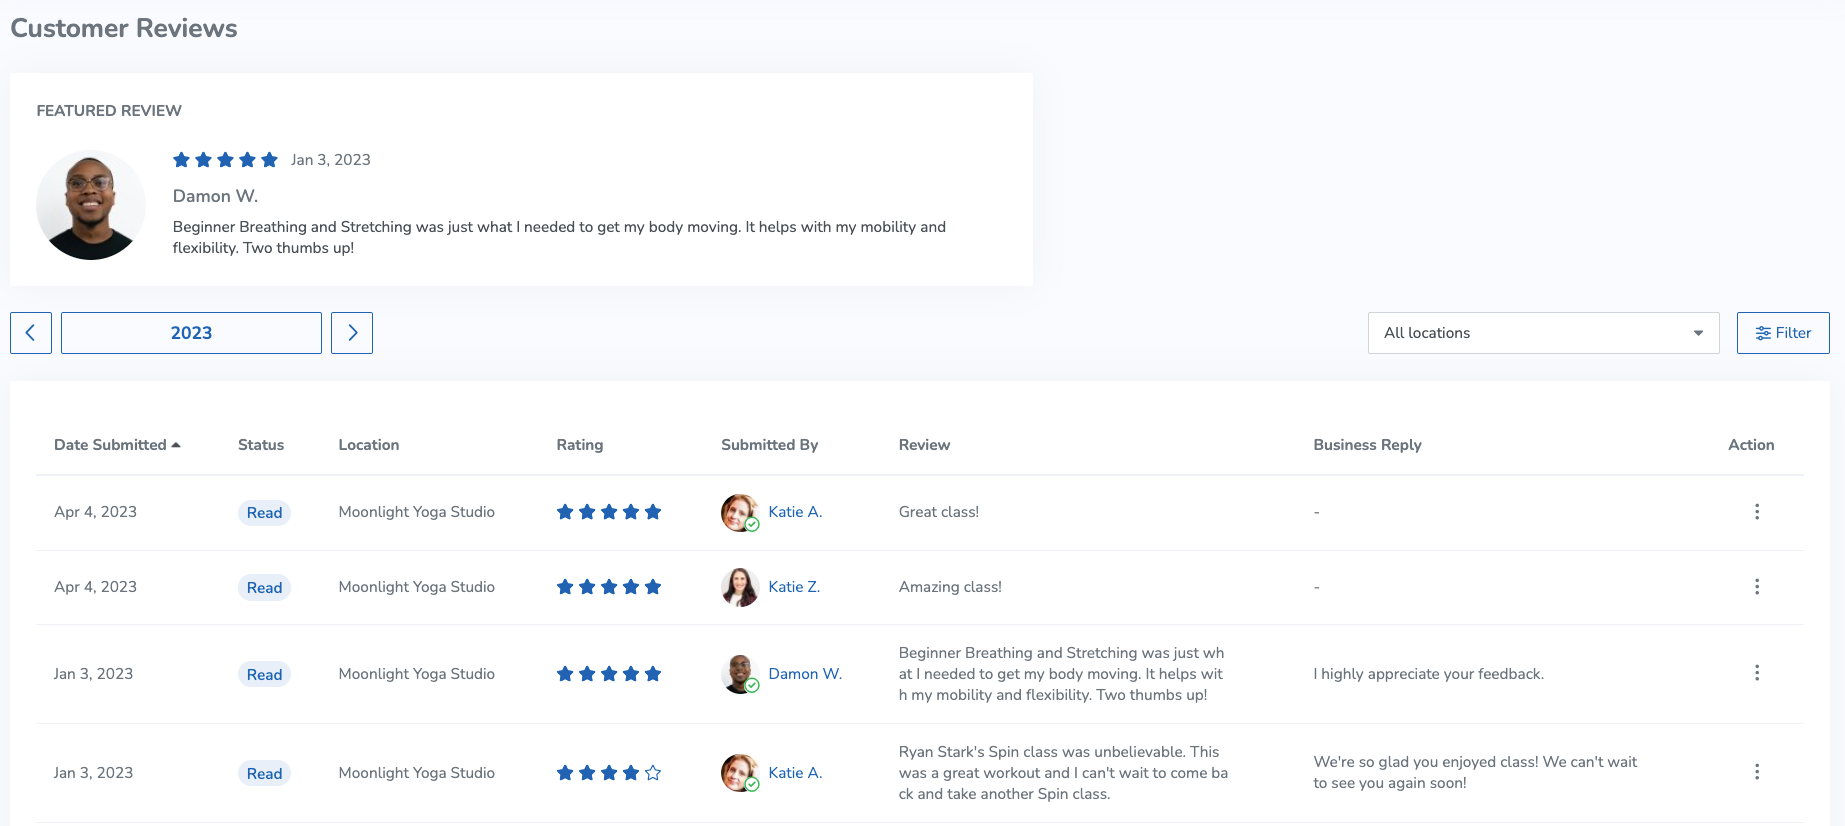 A screenshot of the Customer Reviews page